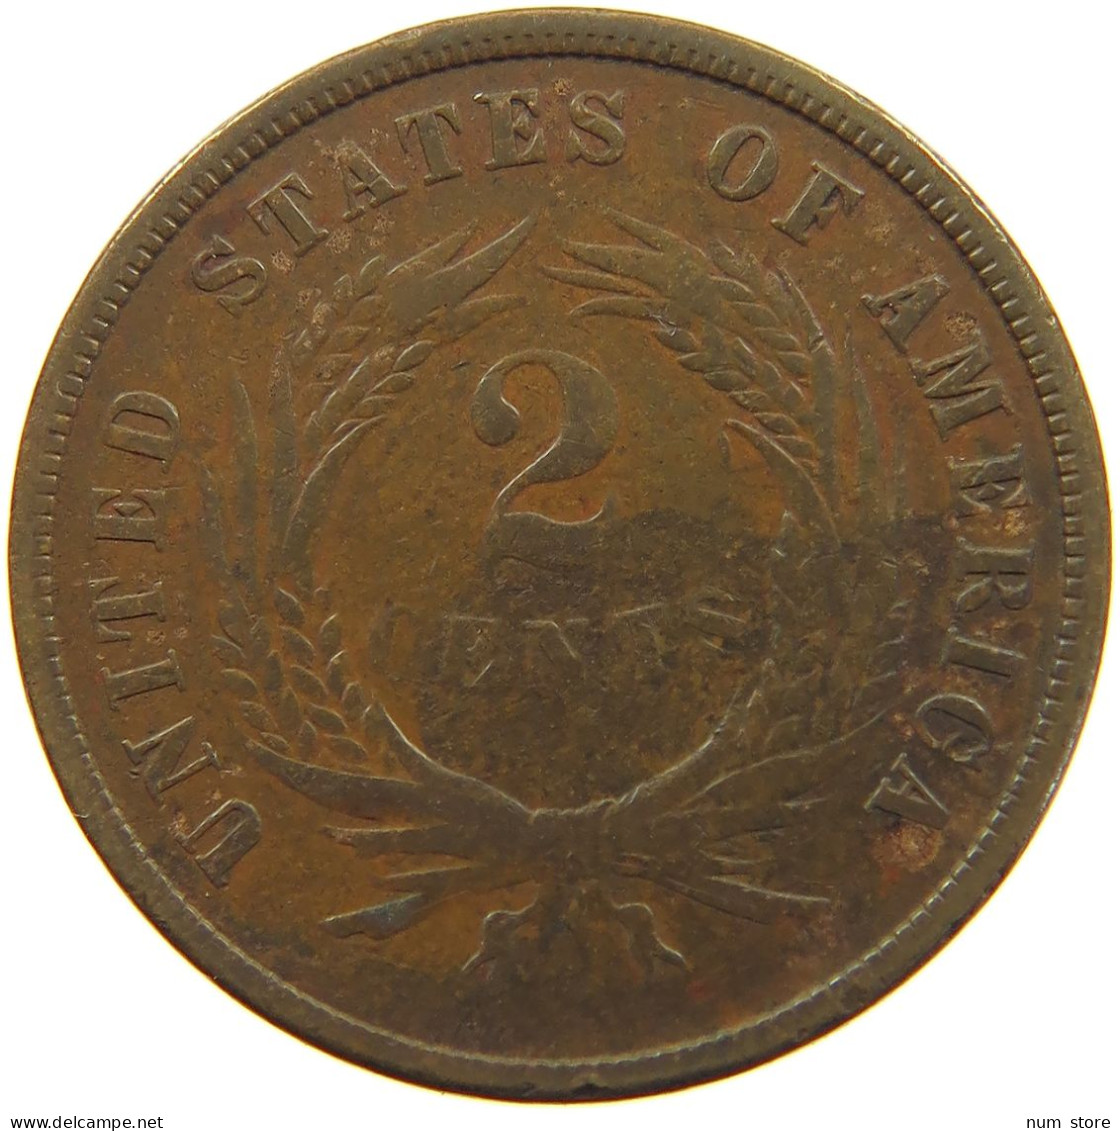 UNITED STATES OF AMERICA 2 CENTS 1865  #t008 0061 - 2, 3 & 20 Cent